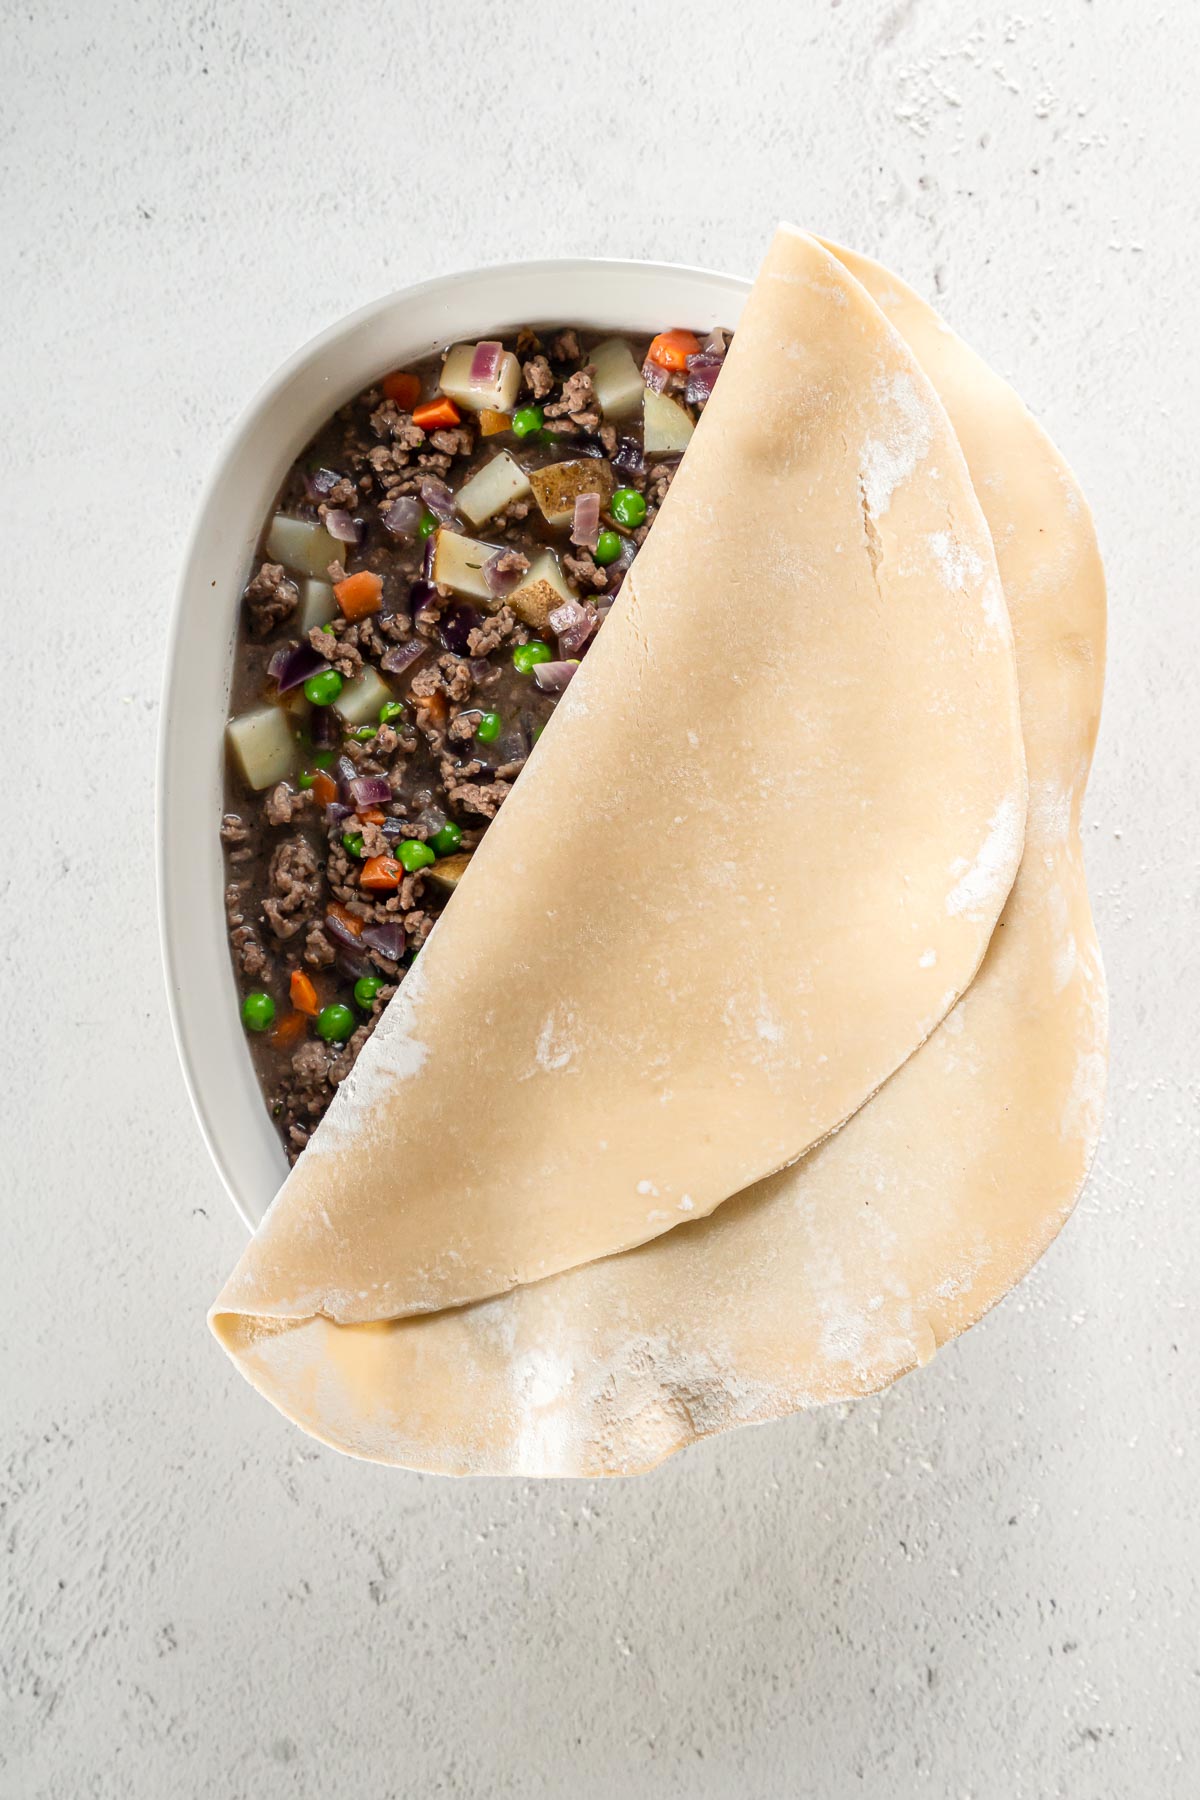 Pie crust being draped over a casserole dish with ground beef filling.